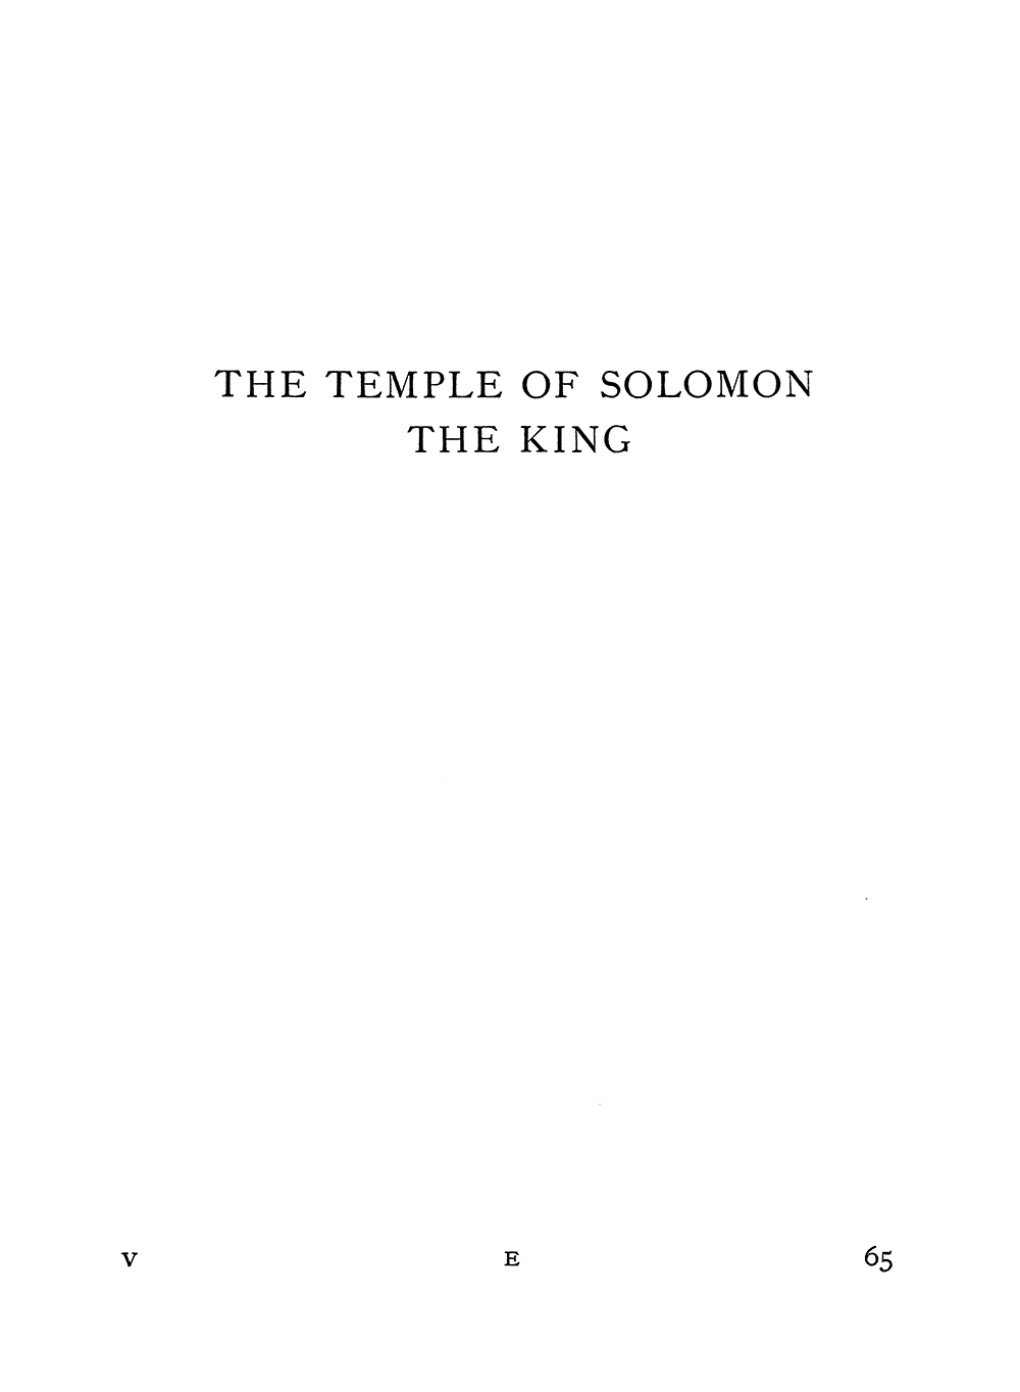 THE TEMPLE of SOLOMON the KING. the Equinox